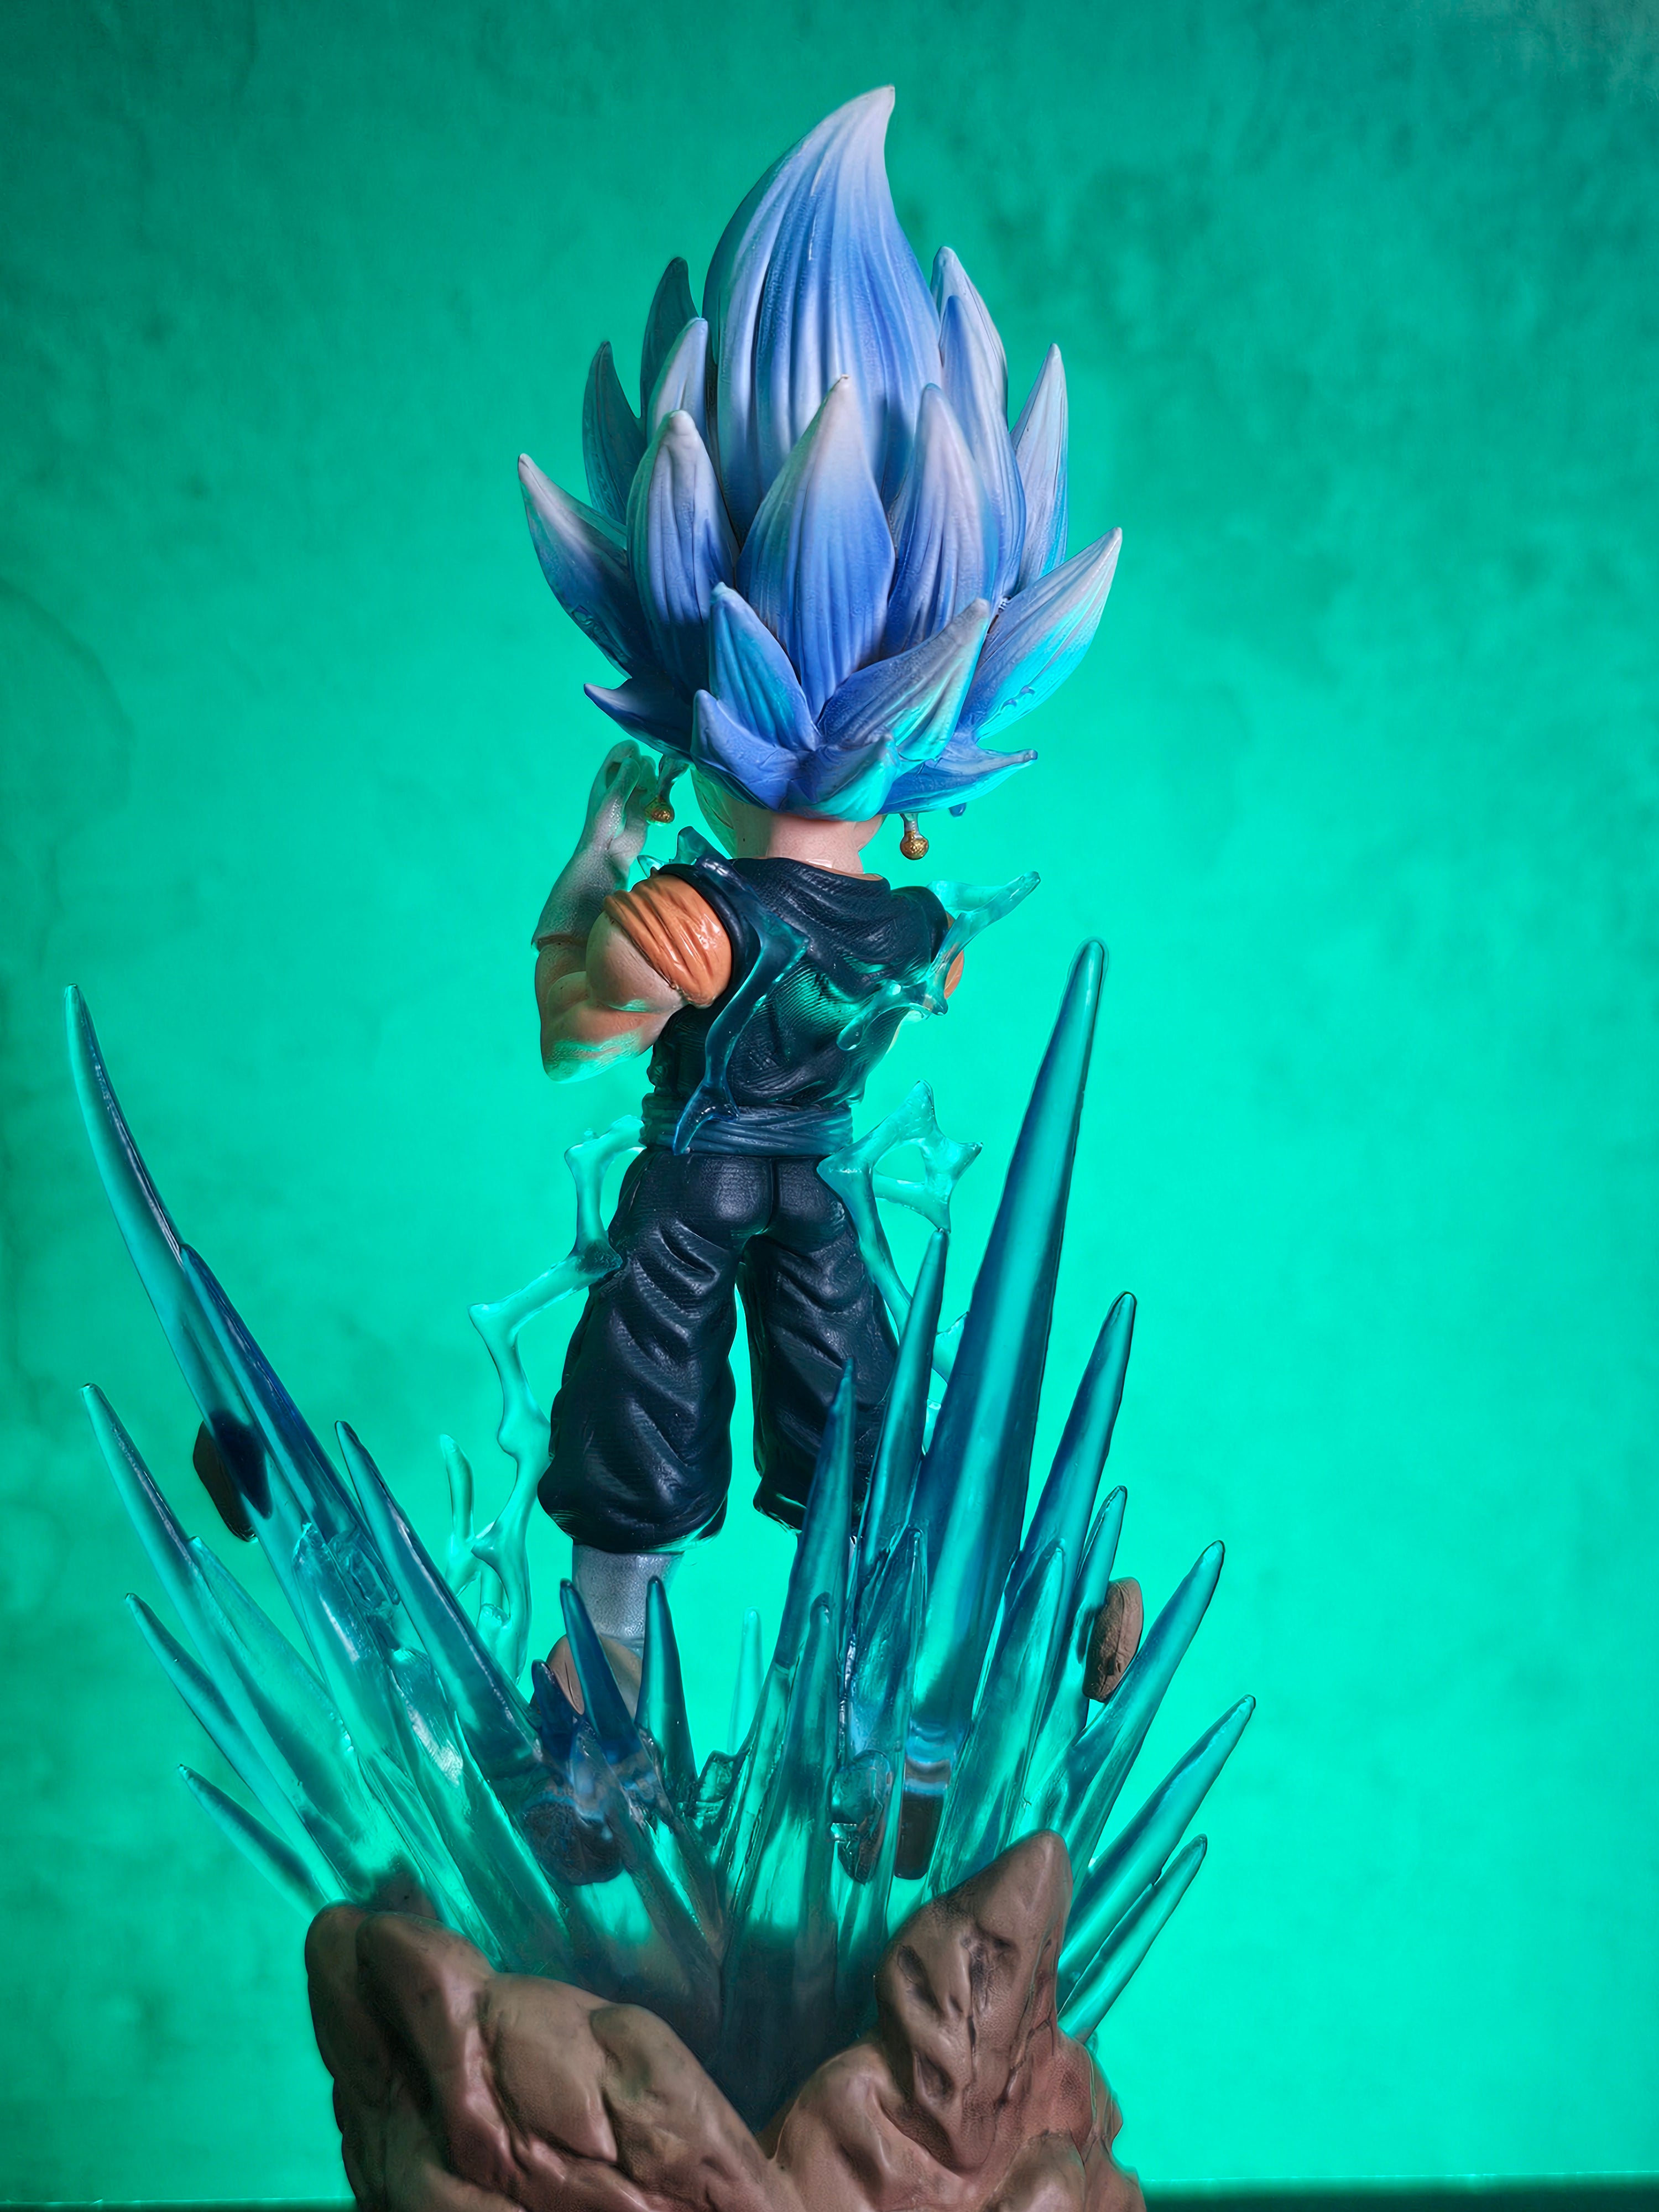 S.h. figuarts full power super saiyan goku standing on a light blue  background, and he is bald, while posing in a charging up pose on Craiyon